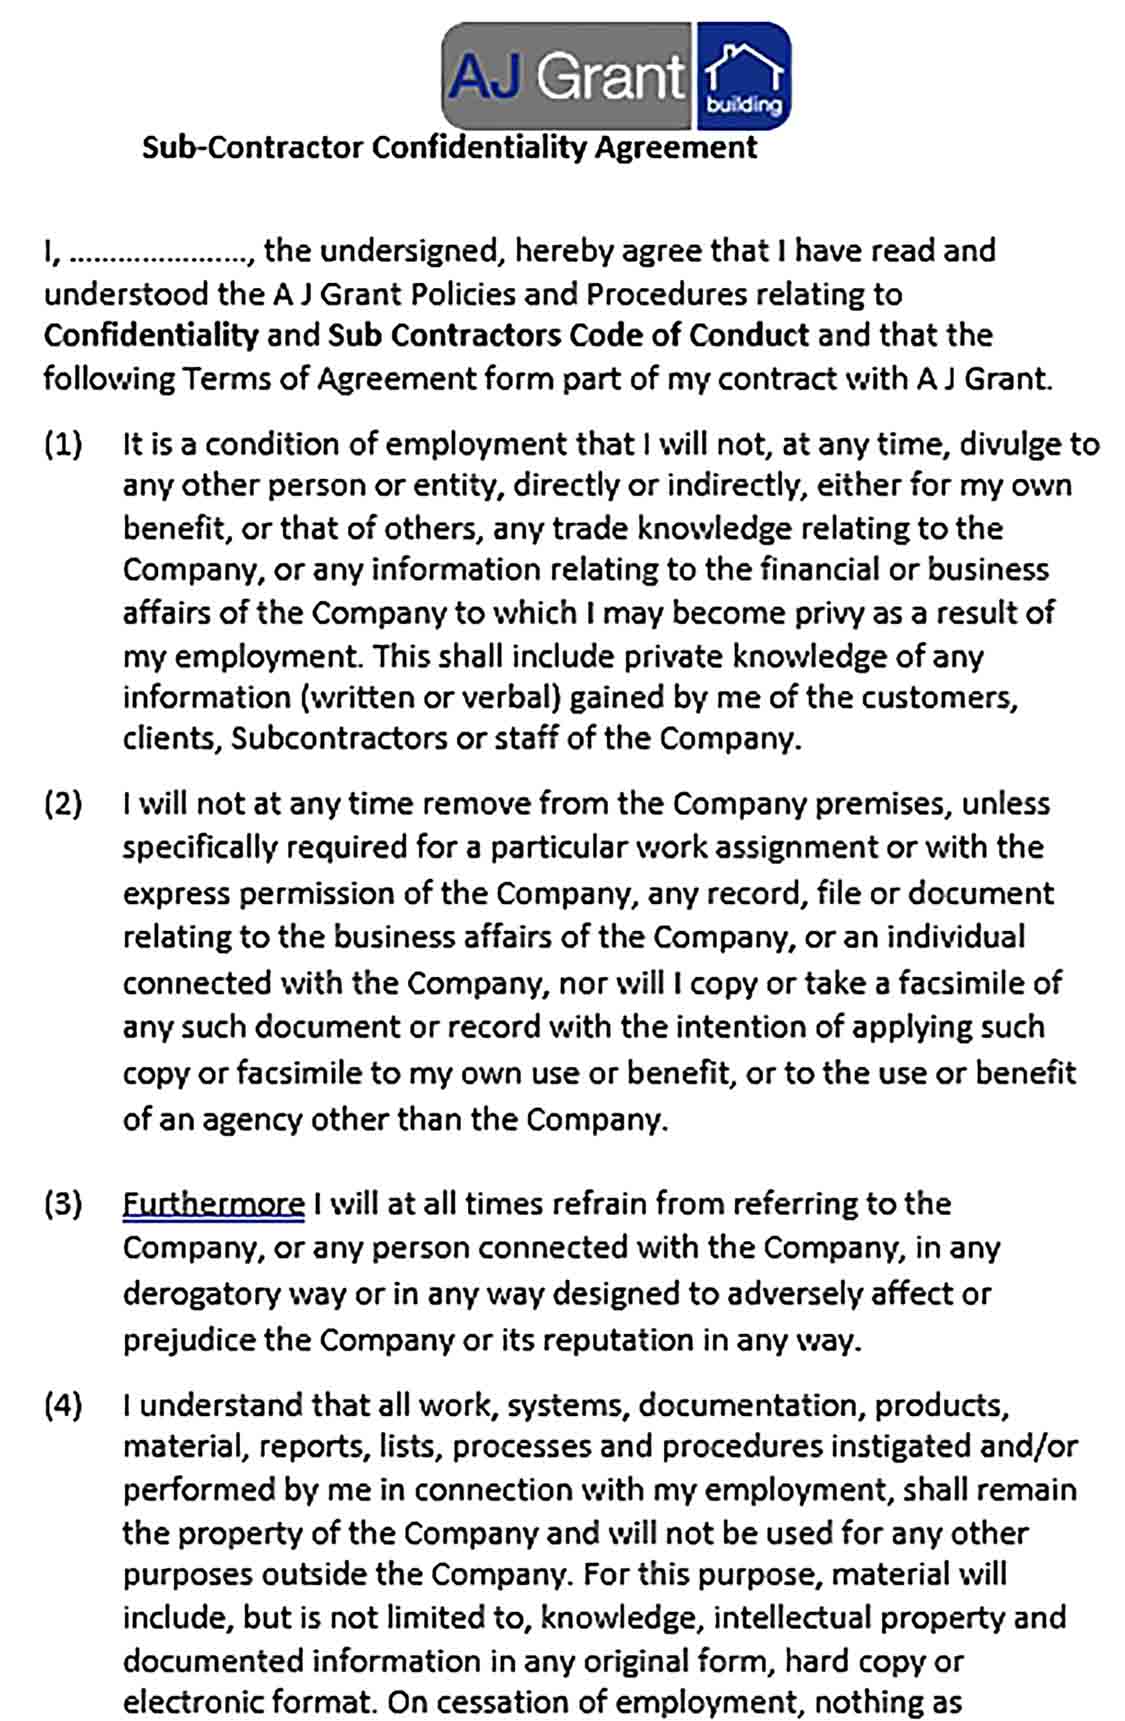 Sample Sub Contractor Confidentiality Agreement